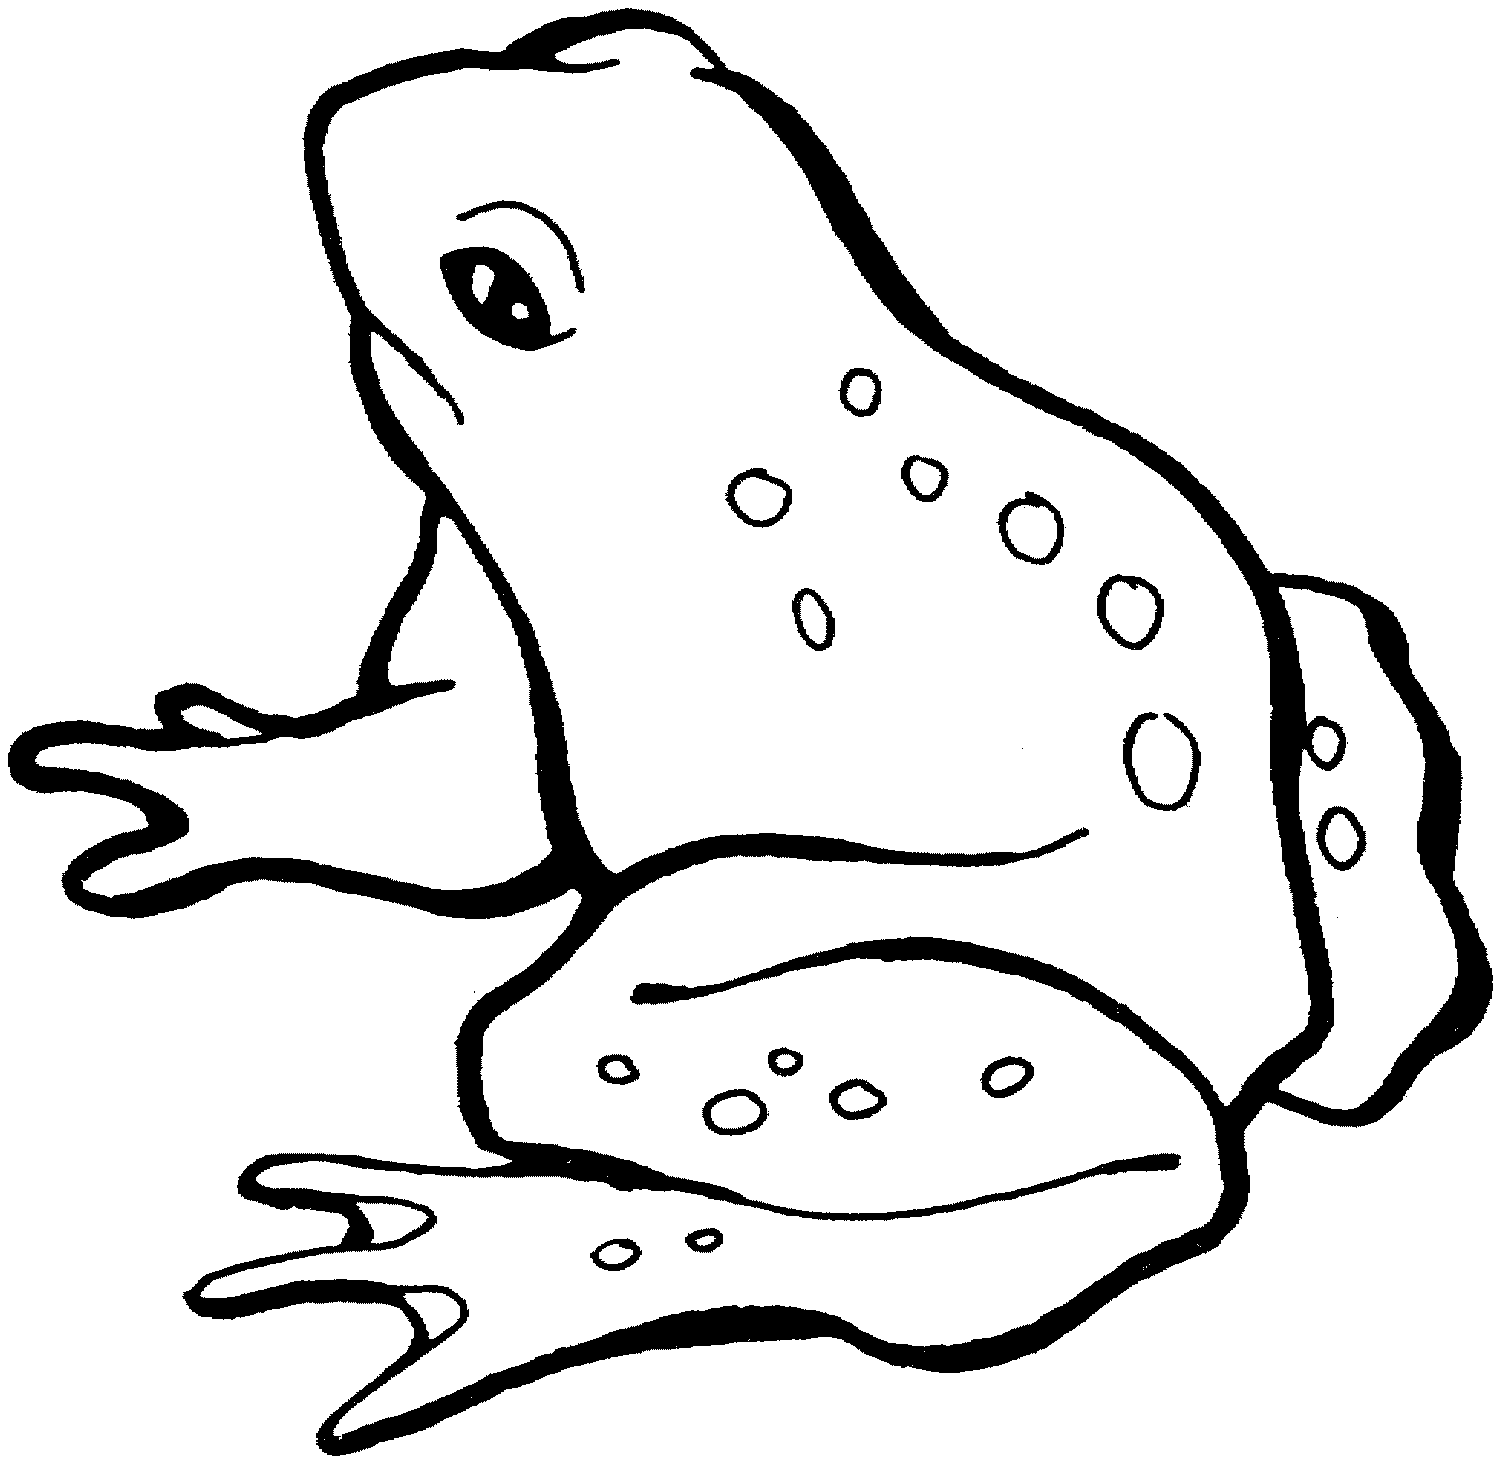 Tree Frog PNG Black And White - 149201